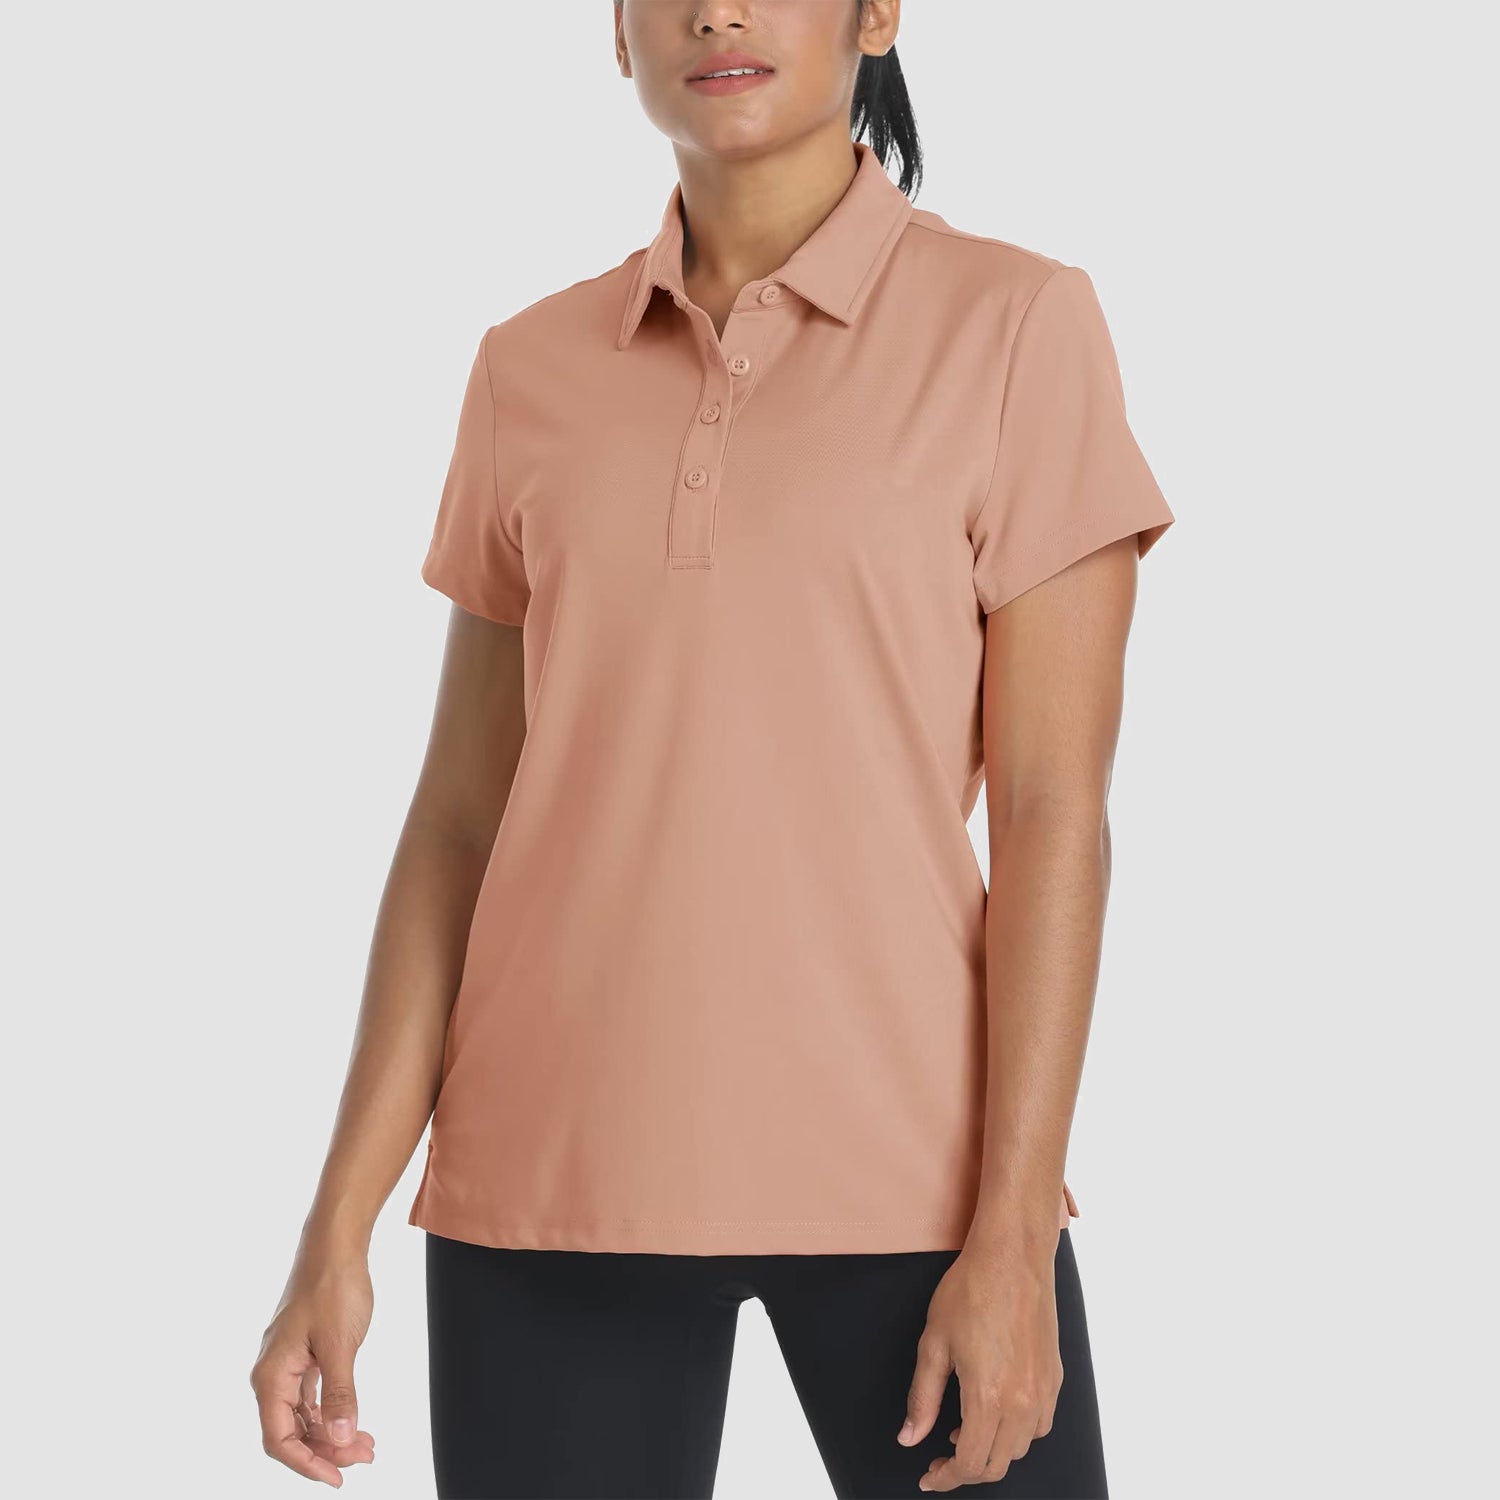 Women's Polo Shirts 4 Buttons Casual T-Shirts Quick Dry Short